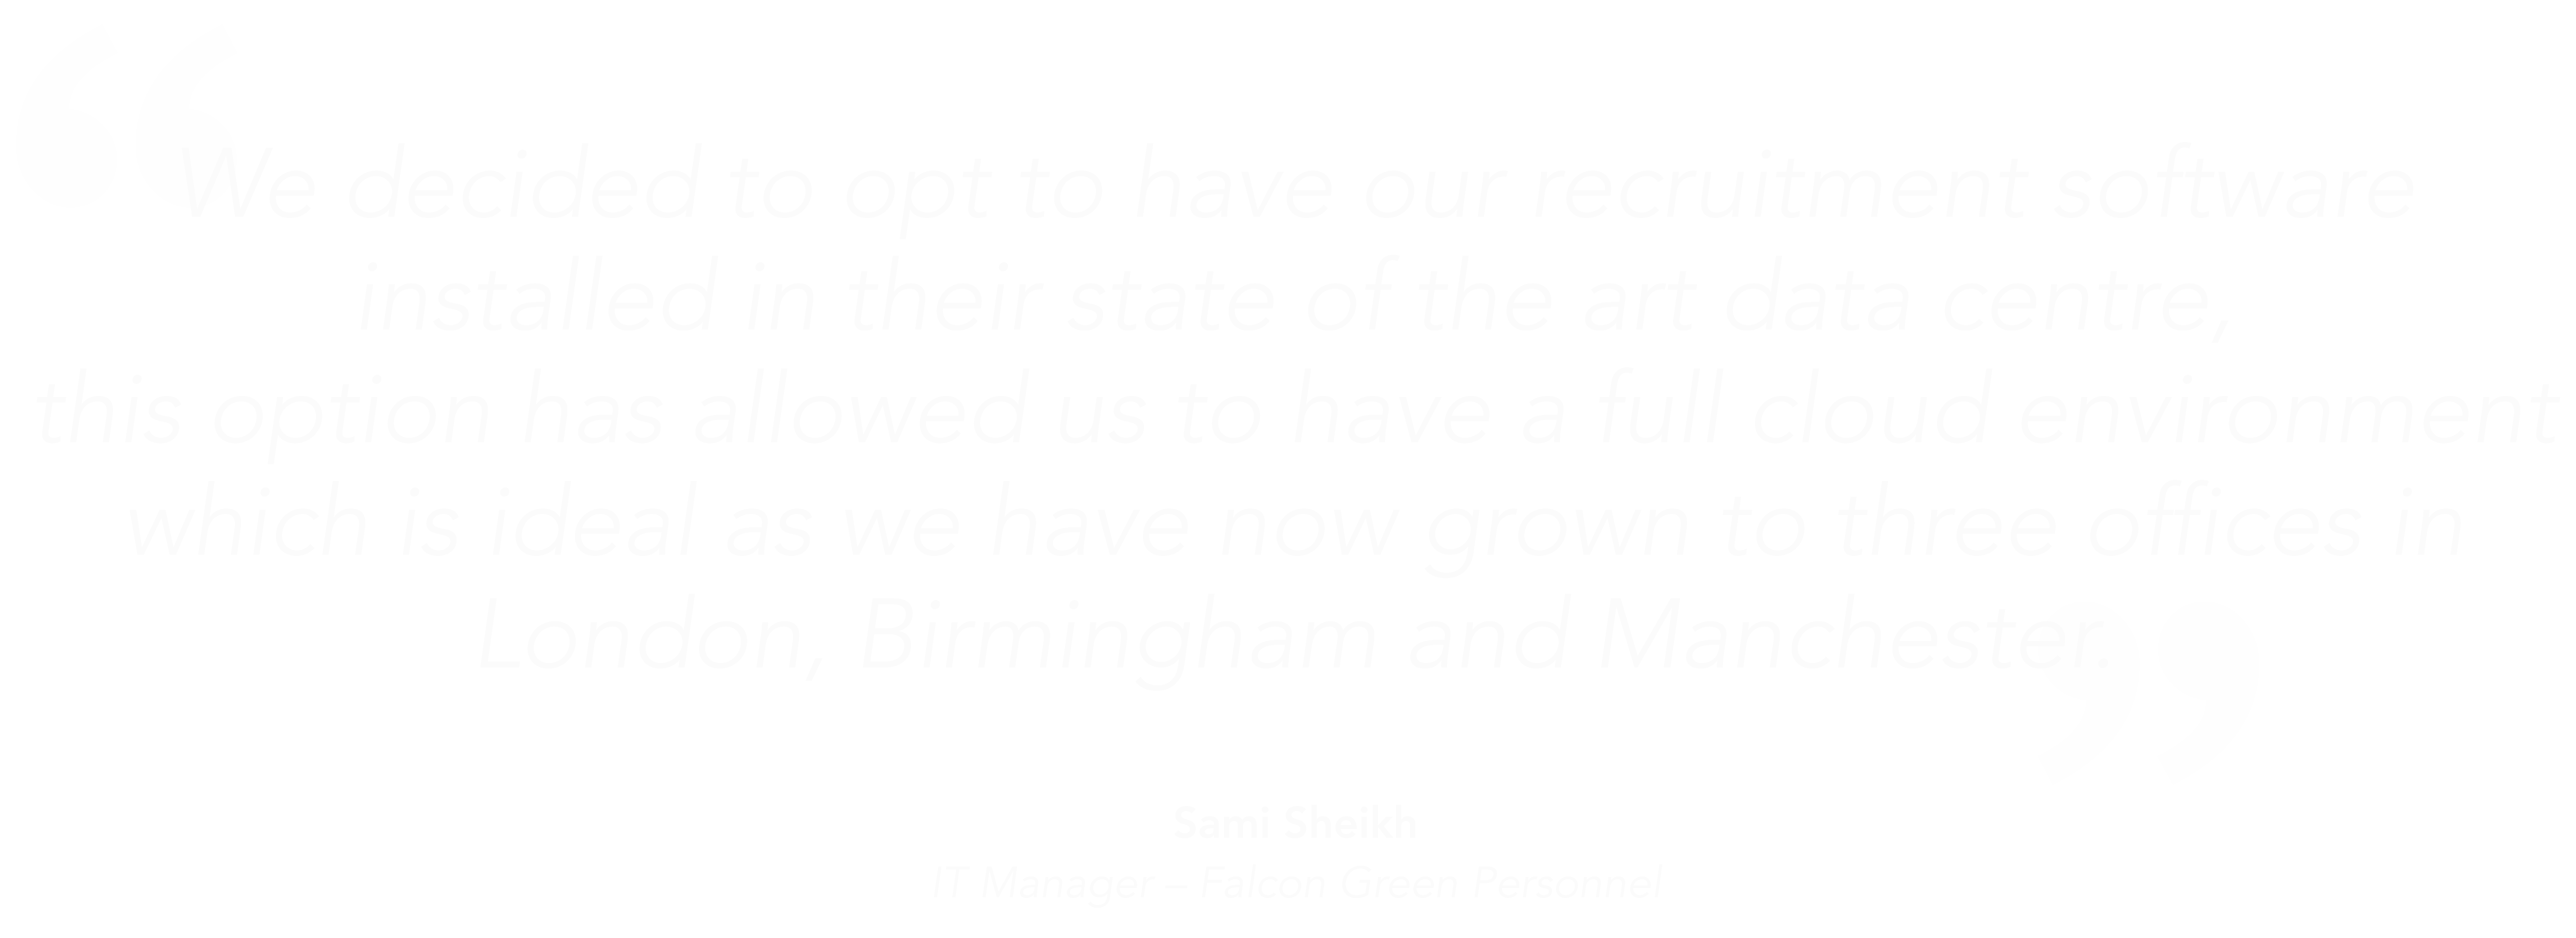 We decided to opt to have our recruitment software installed in their state of the art data centre,this option has allowed us to have a full cloud environment which is ideal as we have now grown to three offices in london birmingham and manchester"-Sami Sheikh Falcon Green Personnel